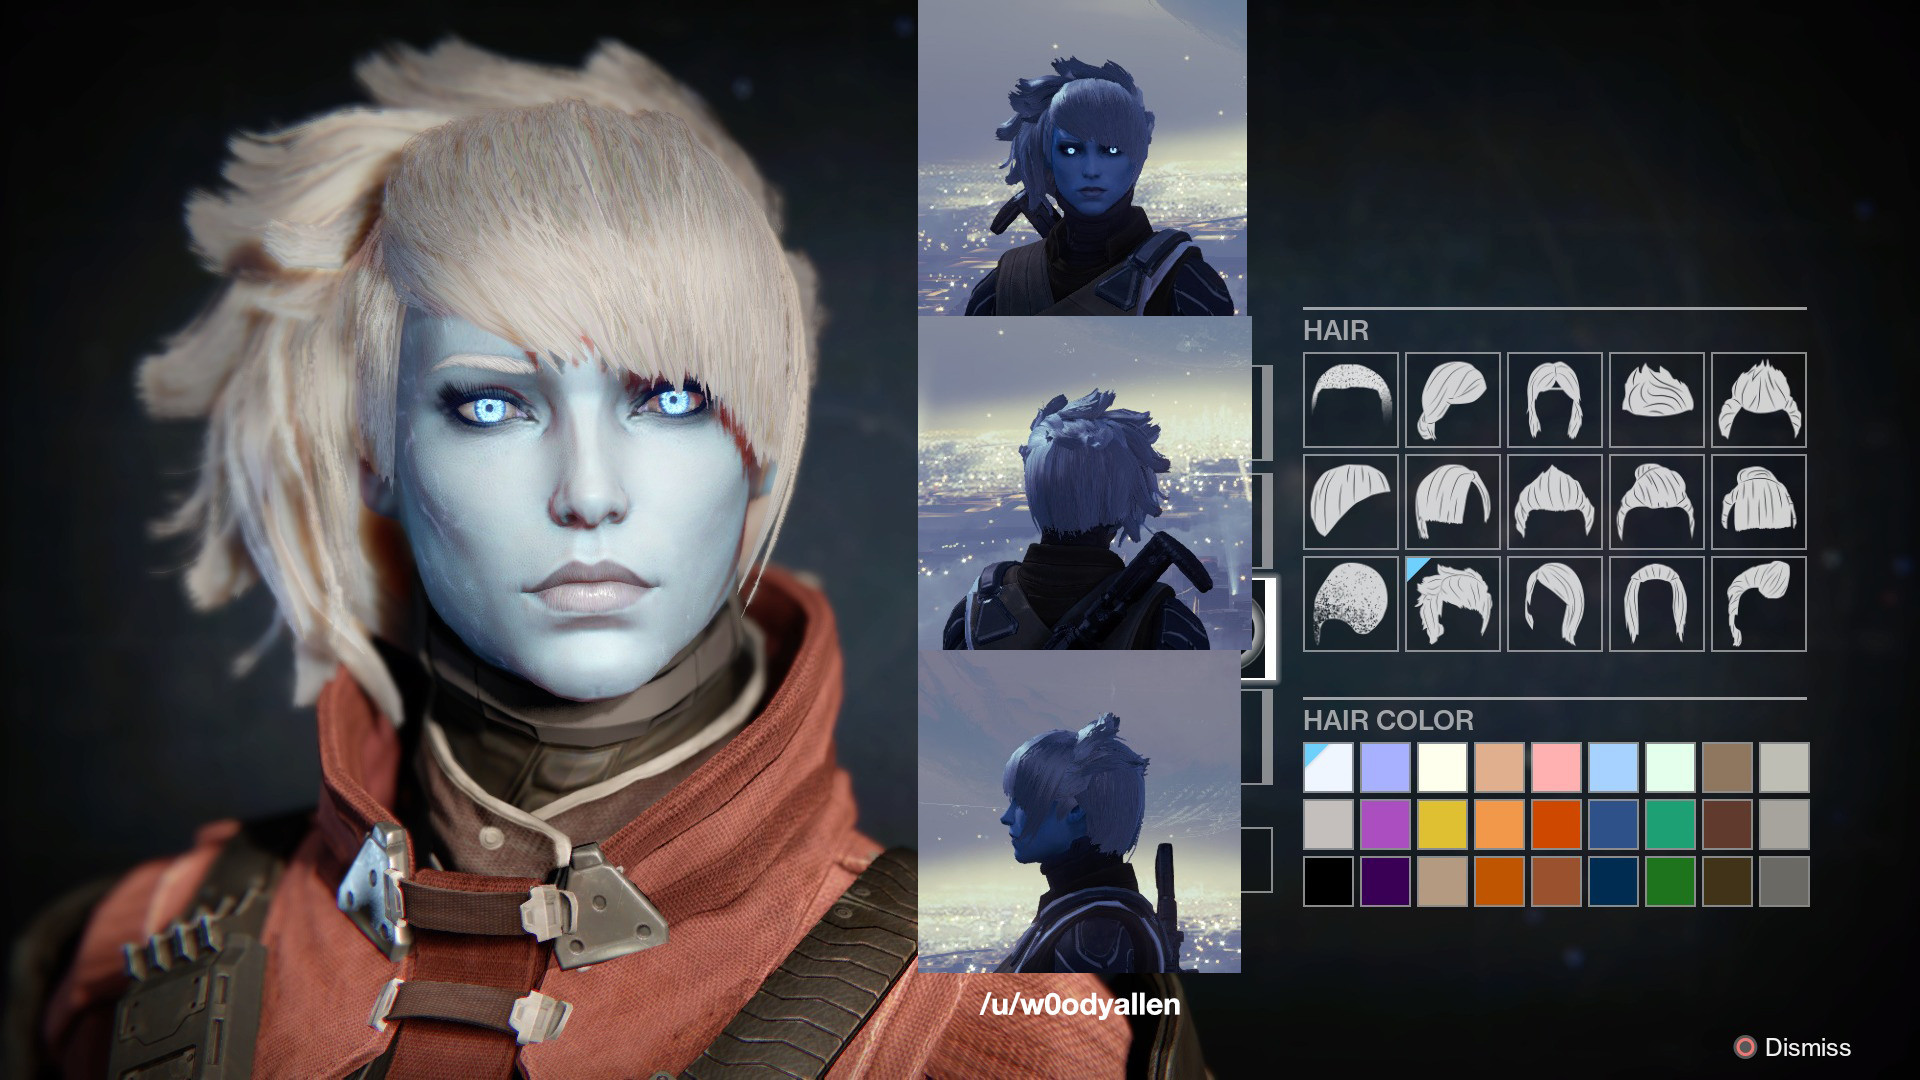 Destiny 2 Female Awoken Hairstyles
 Destiny Awoken Female Hairstyles what your hair looks